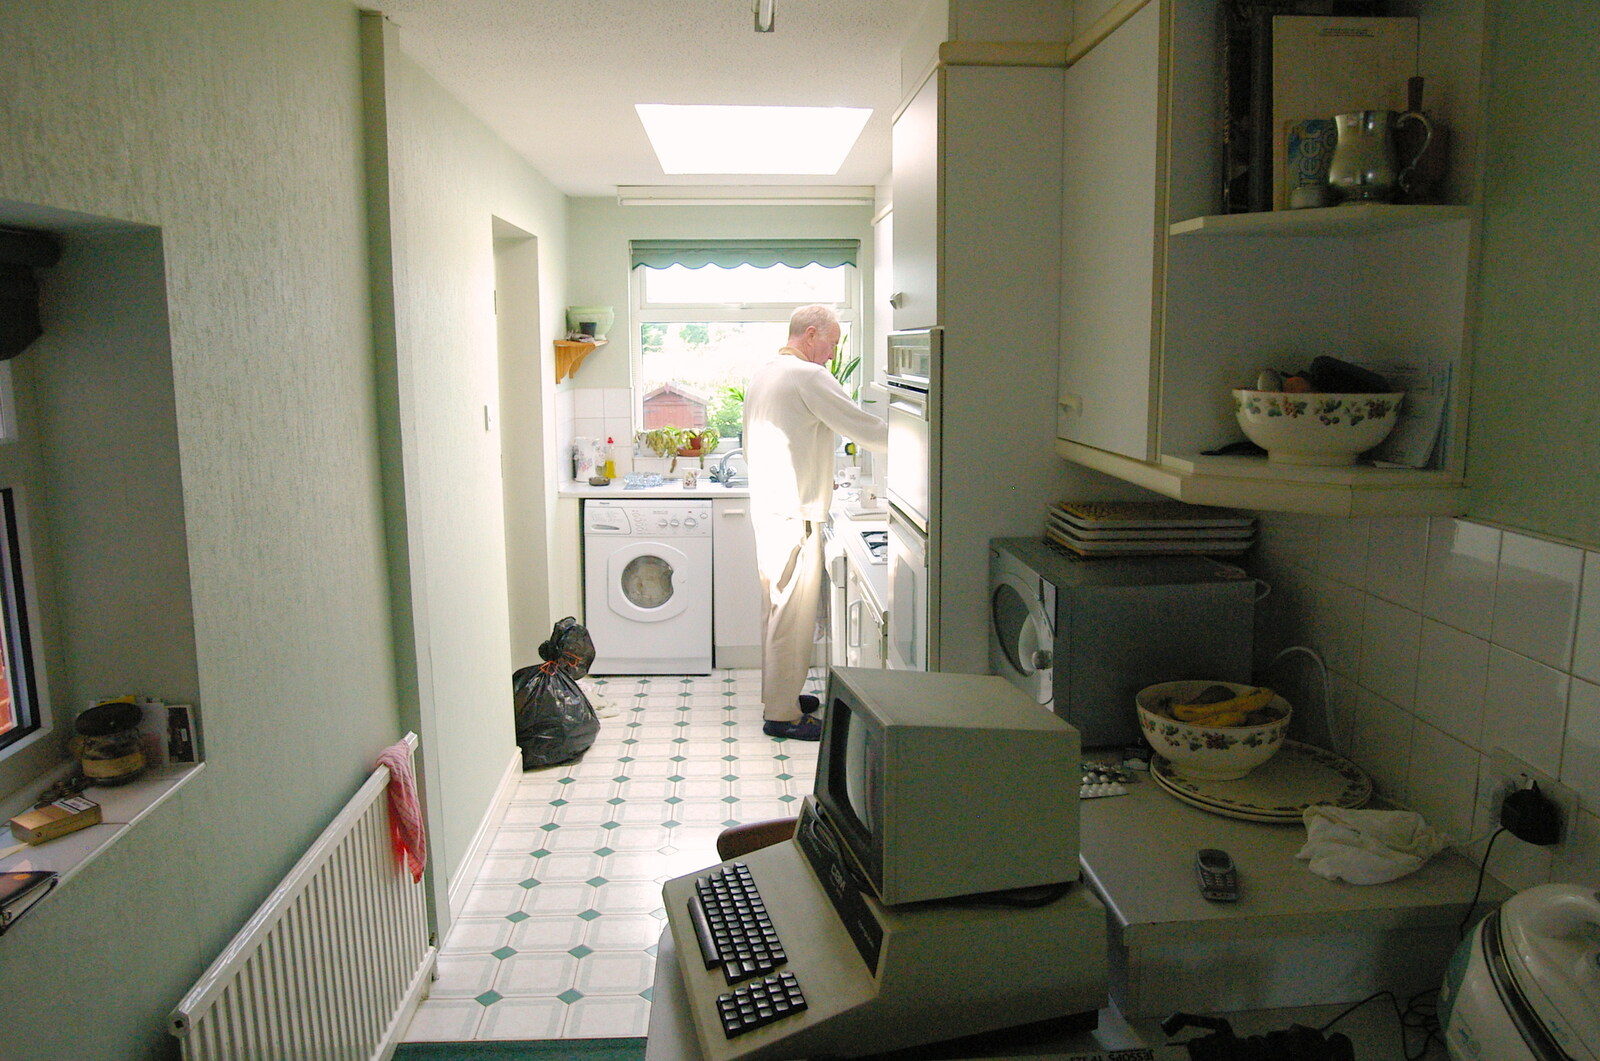 A Trip Around Macclesfield and Sandbach, Cheshire - 10th September 2005: A Commodore PET in the old man's kitchen